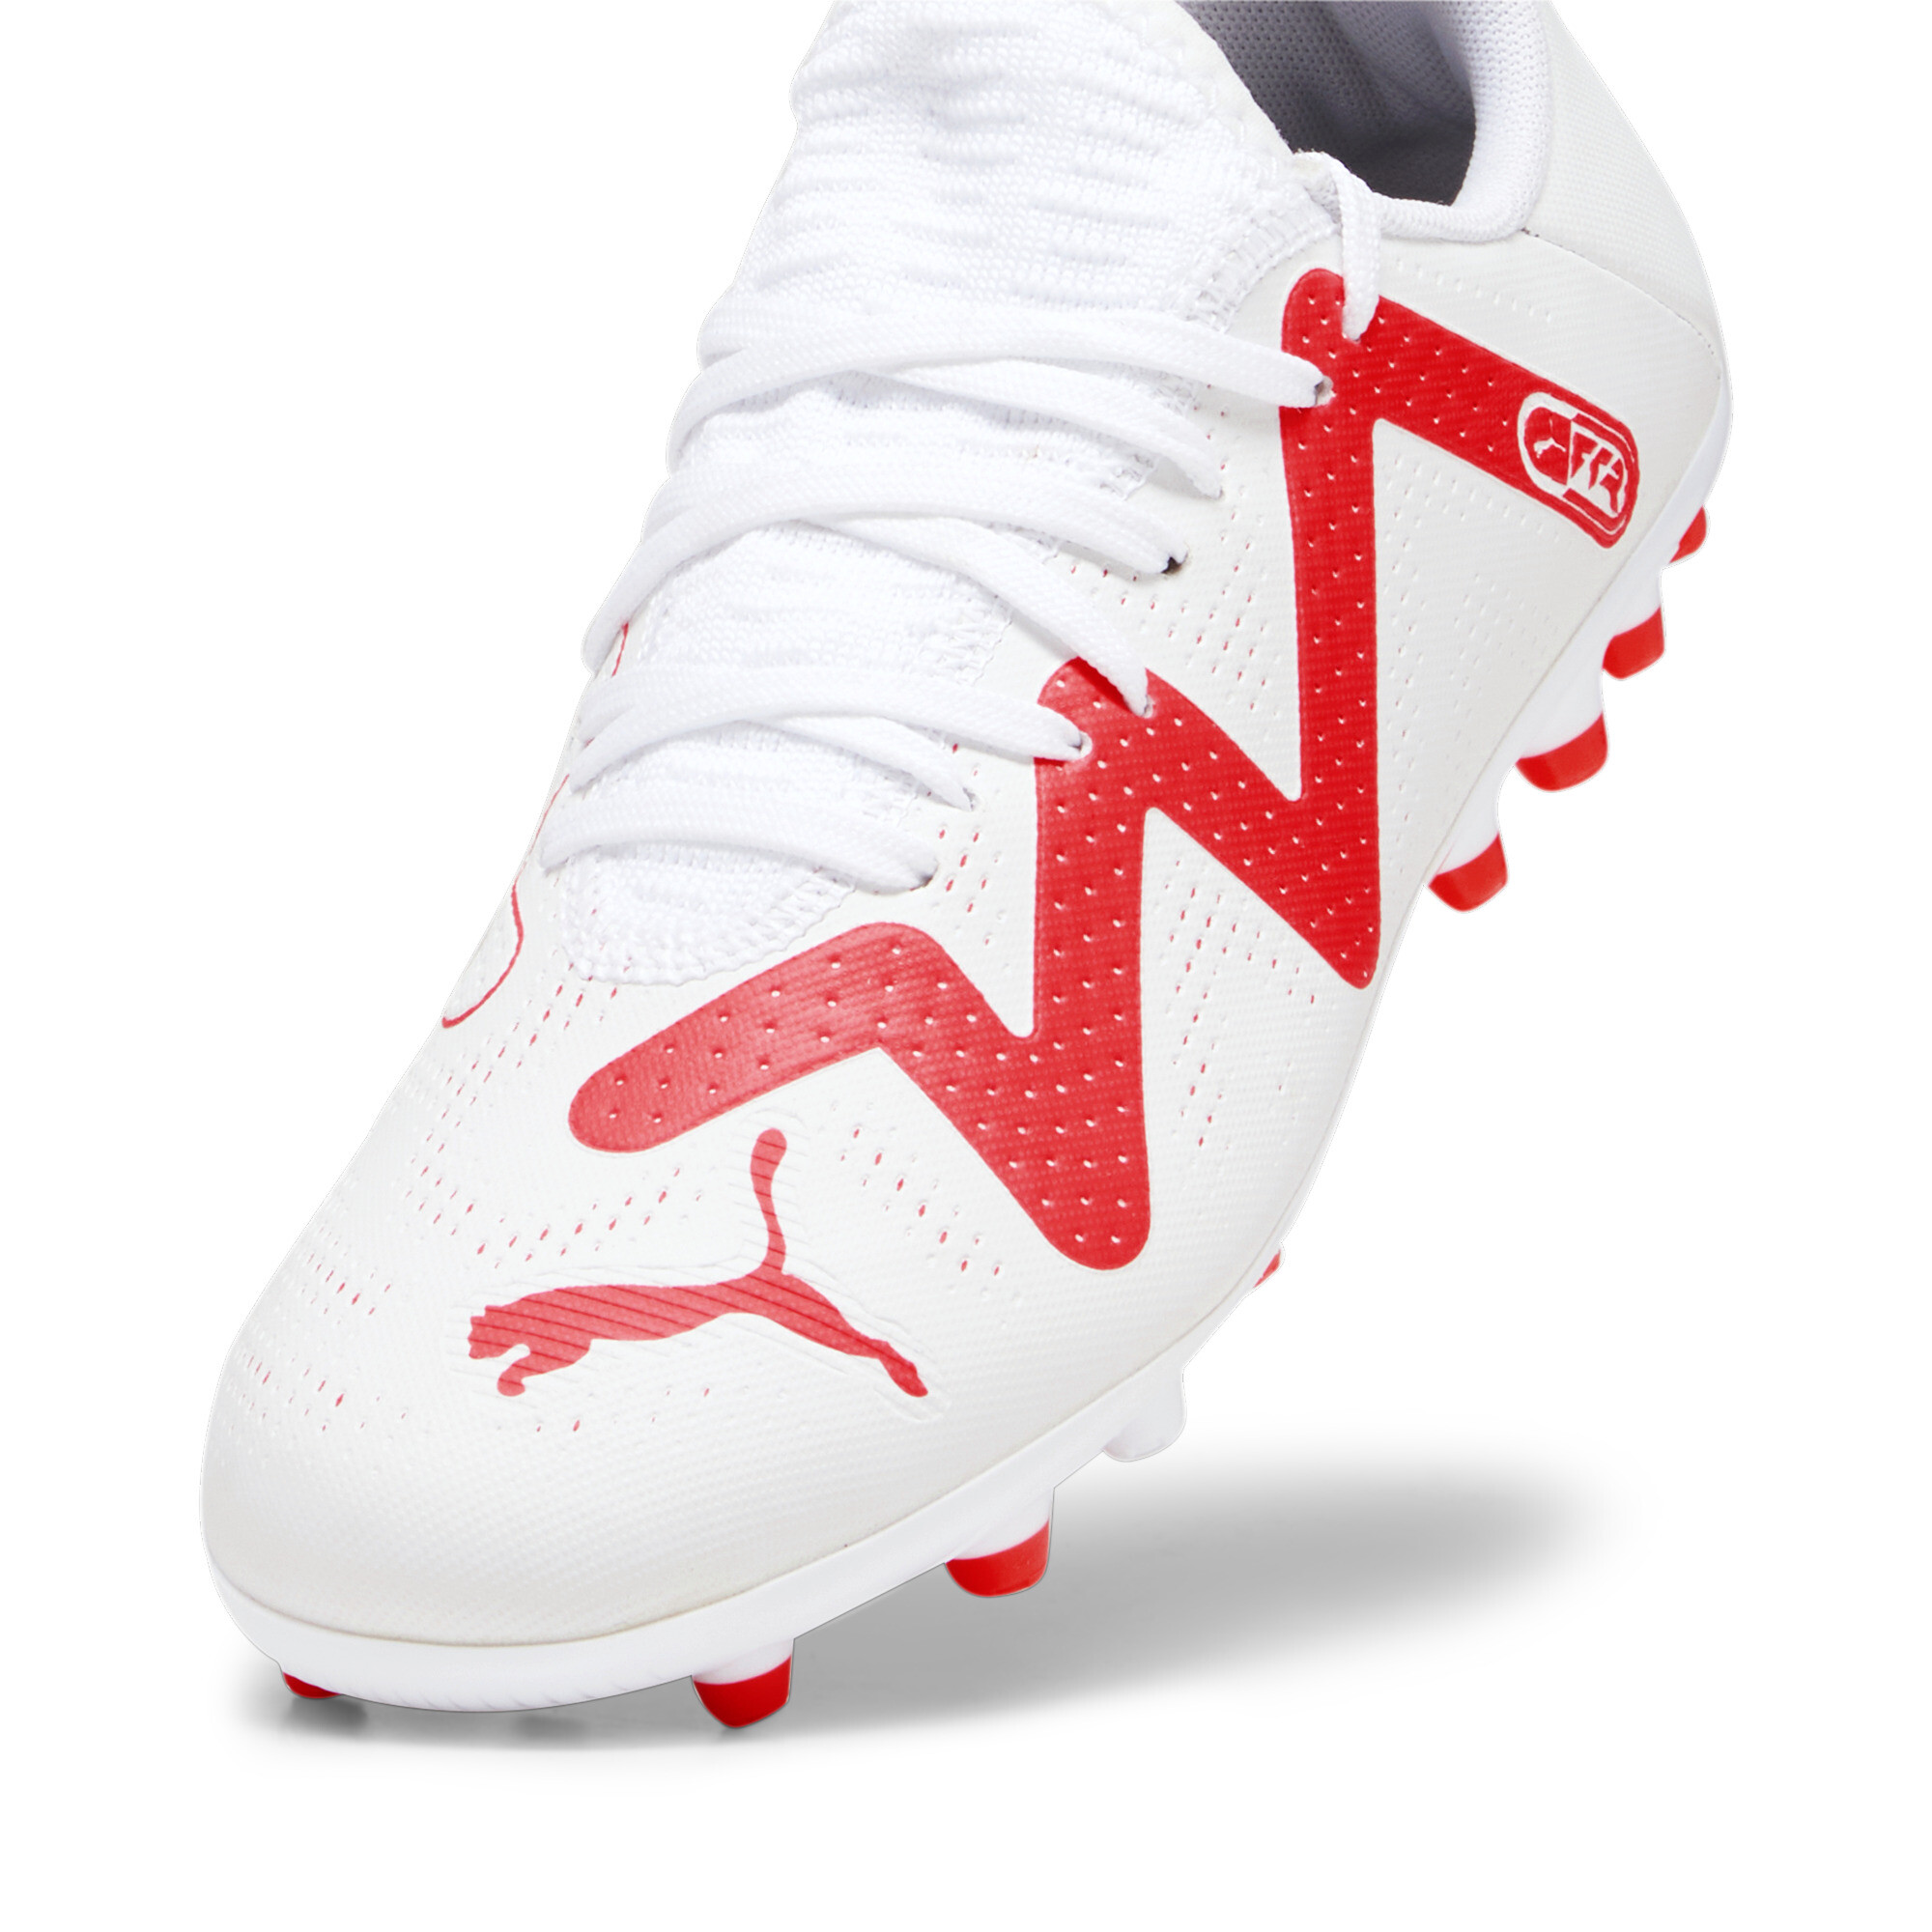 Puma FUTURE PLAY MG Youth Football Boots, White, Size 34.5, Shoes